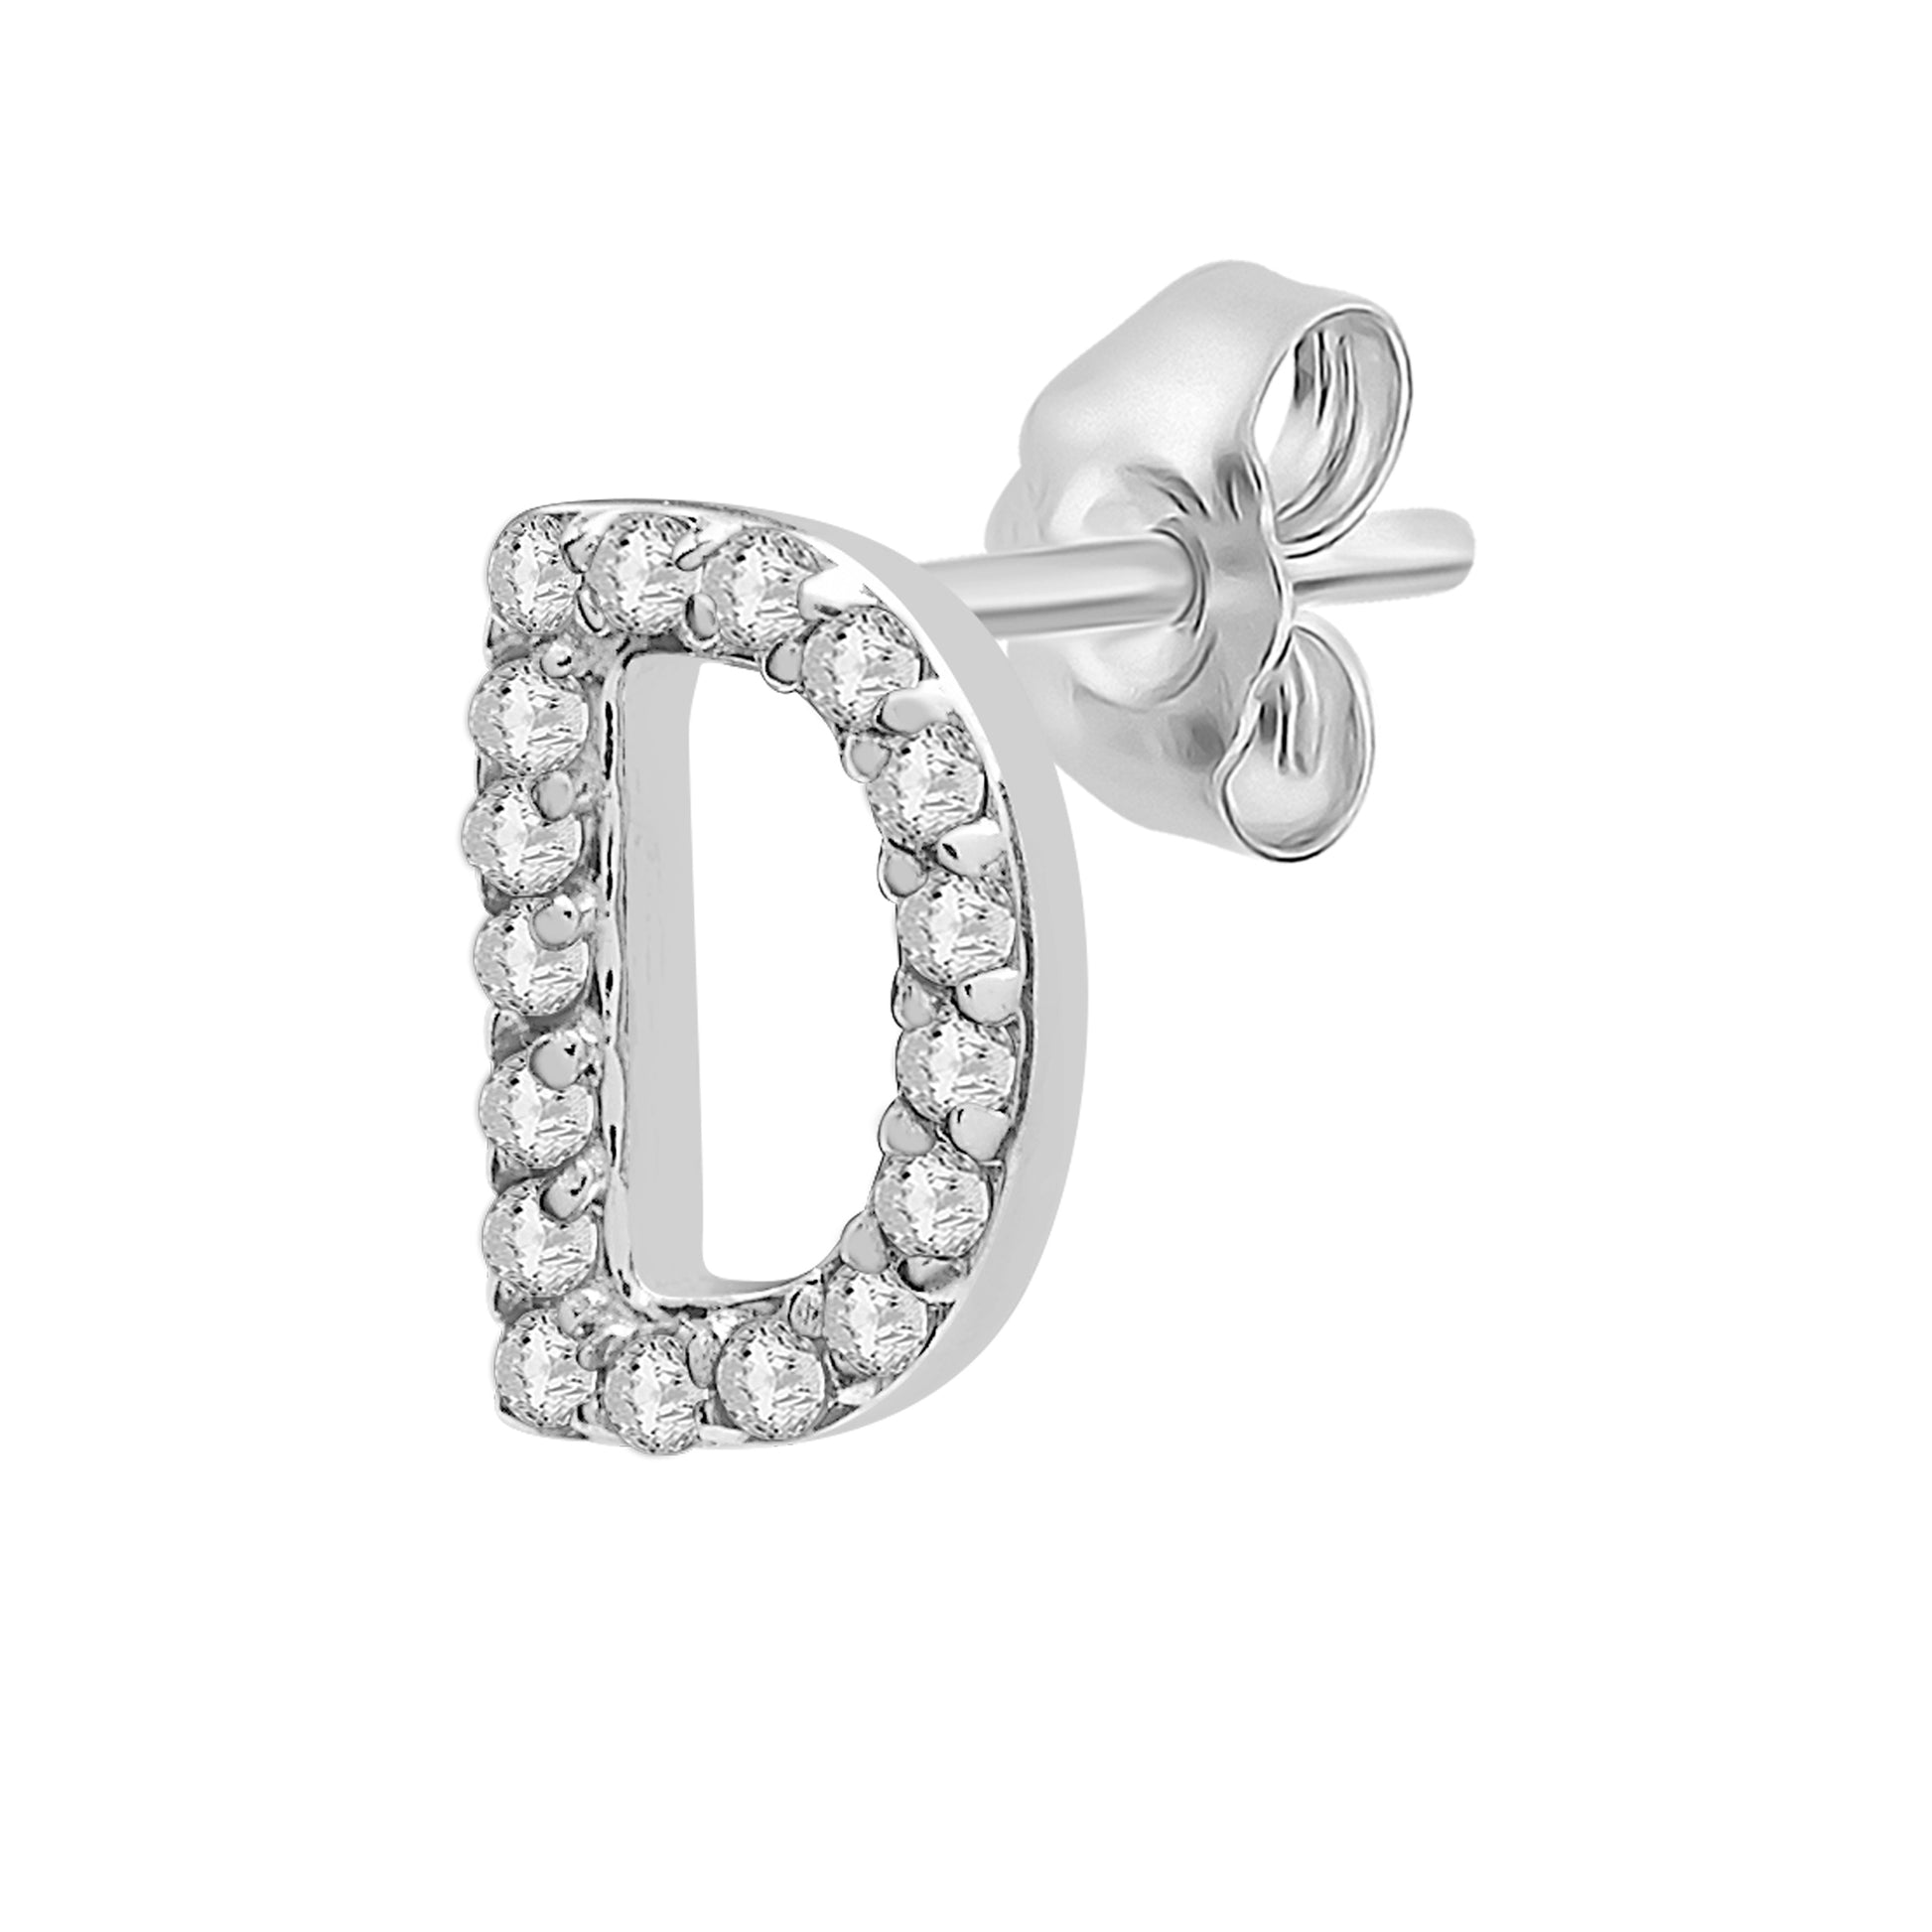 Single Initial Diamond Stud - D in White Gold